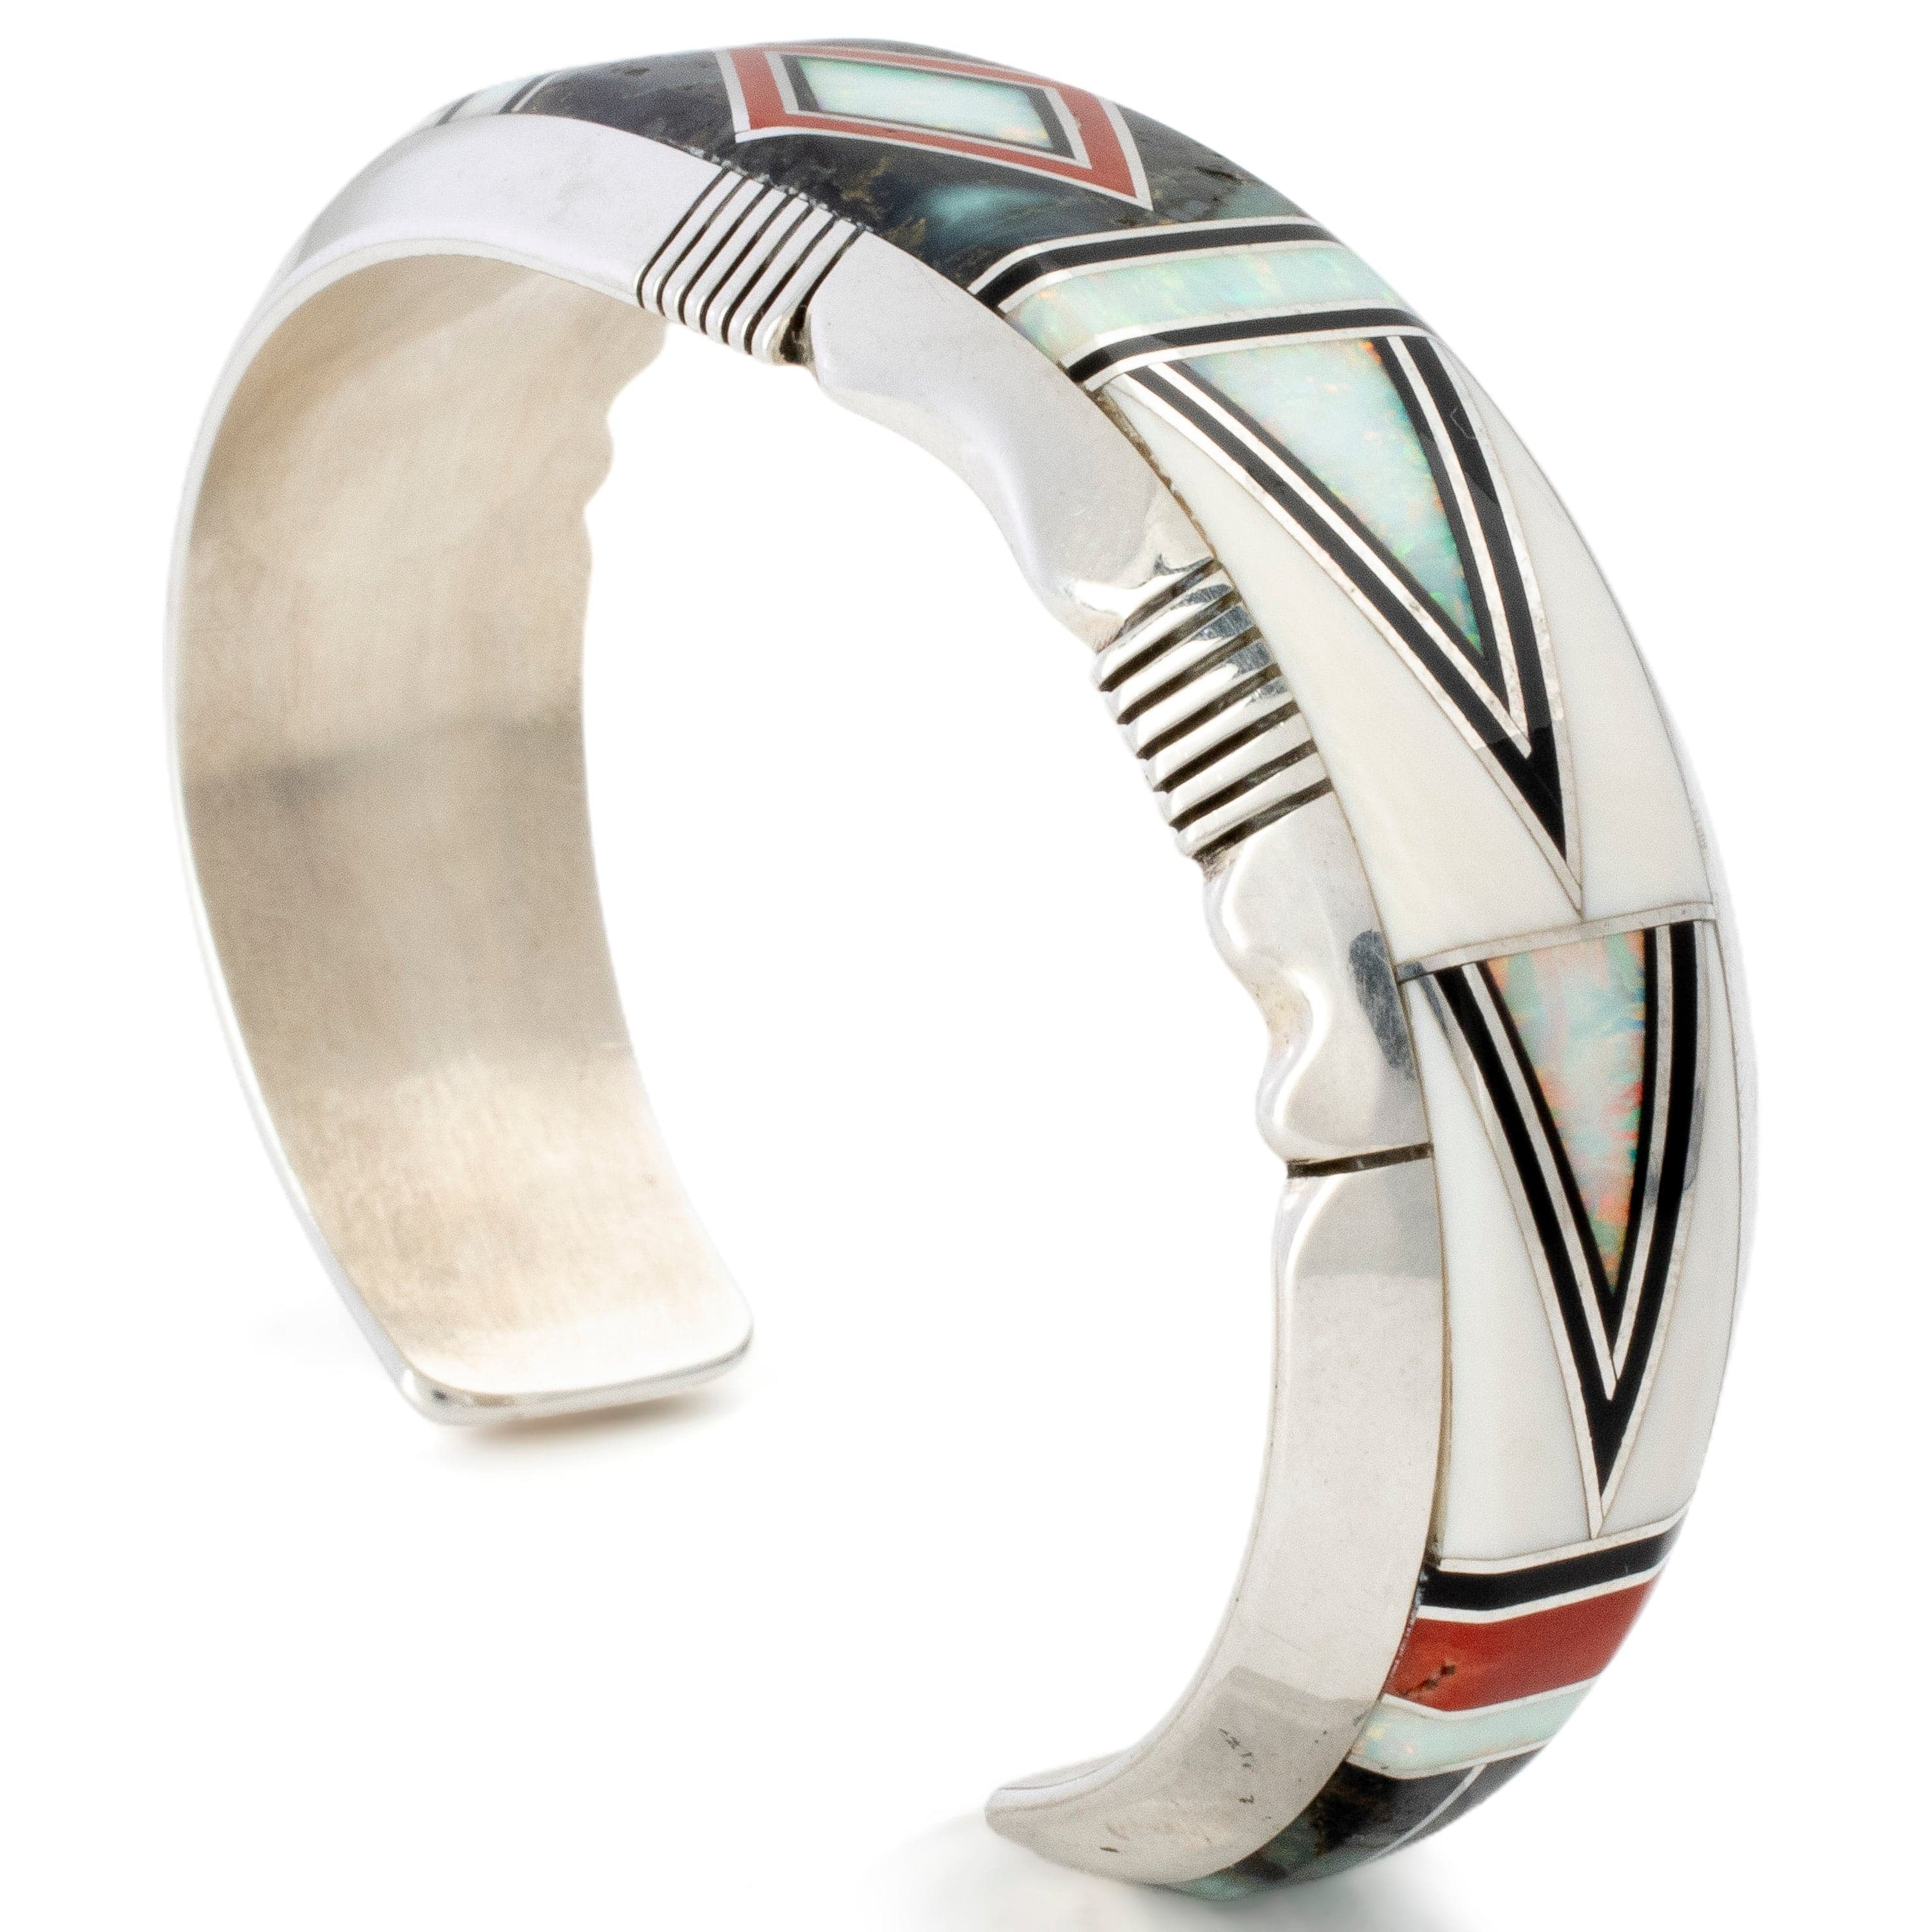 Kalifano Native American Jewelry Erik Nelson White Pristine Magnesite, White Opal, New Lander Stone, and Coral Inlay USA Native American Made 925 Sterling Silver Cuff NAB3000.013